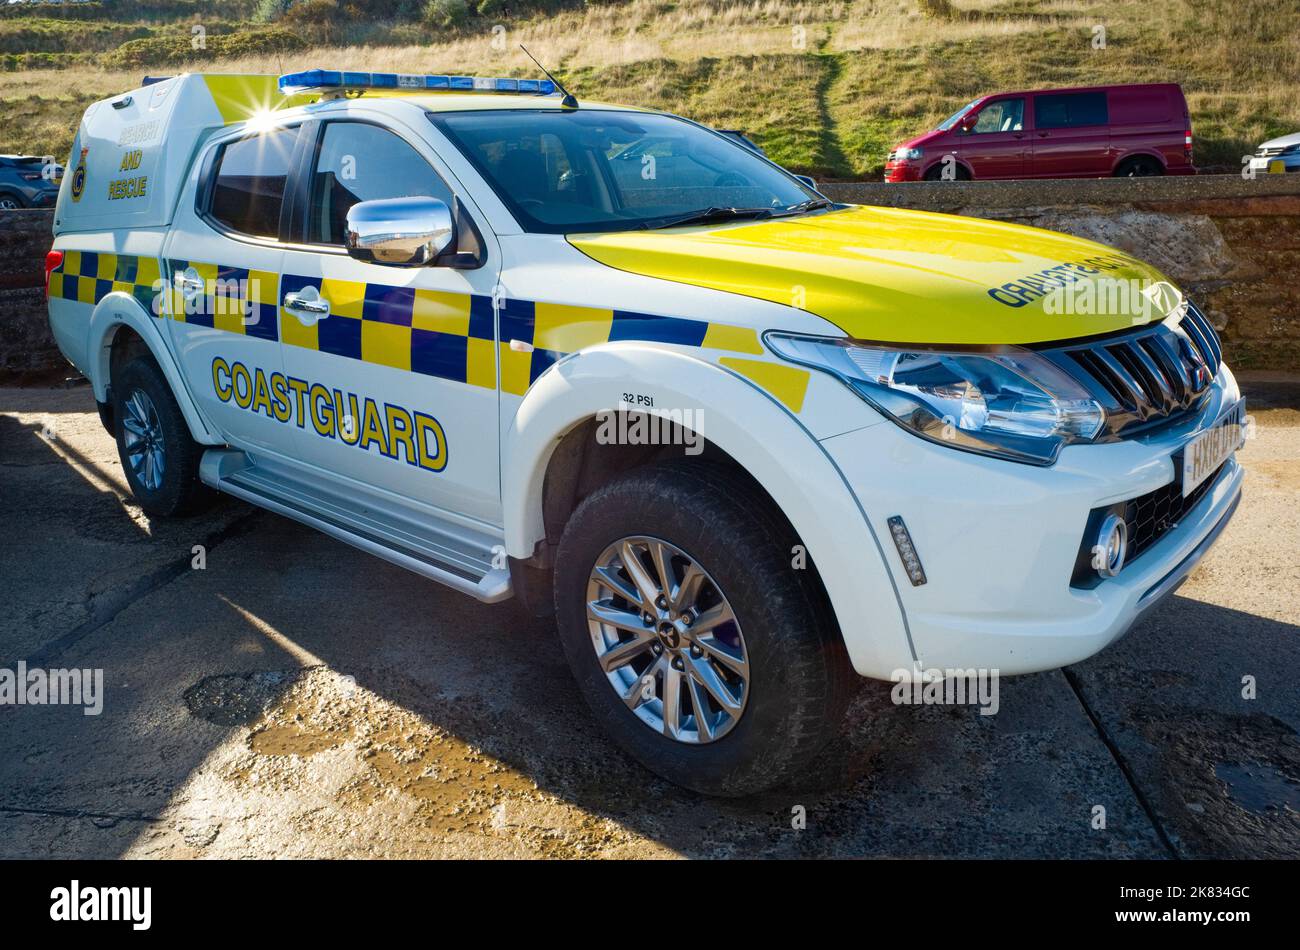 Coastguard search and rescue emergency vehicle at Scarborough Stock Photo